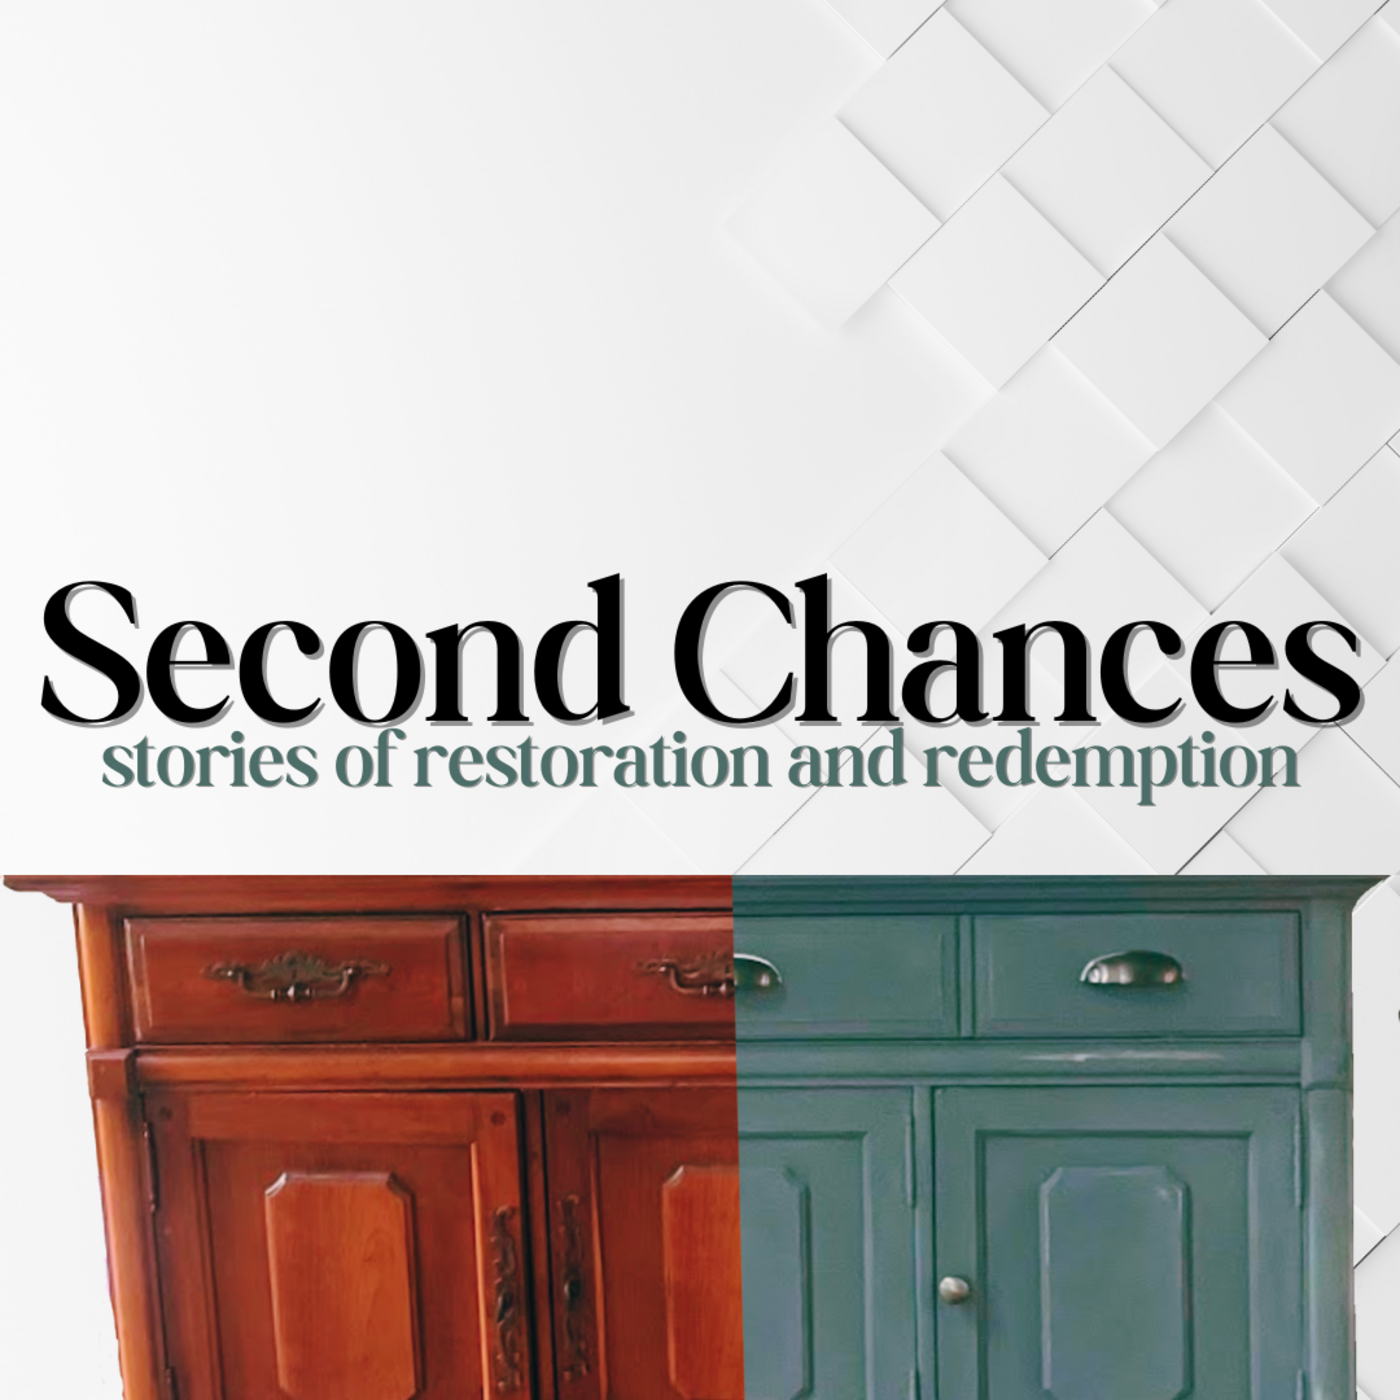 Episode 197: Second Chances - Canaanite Woman